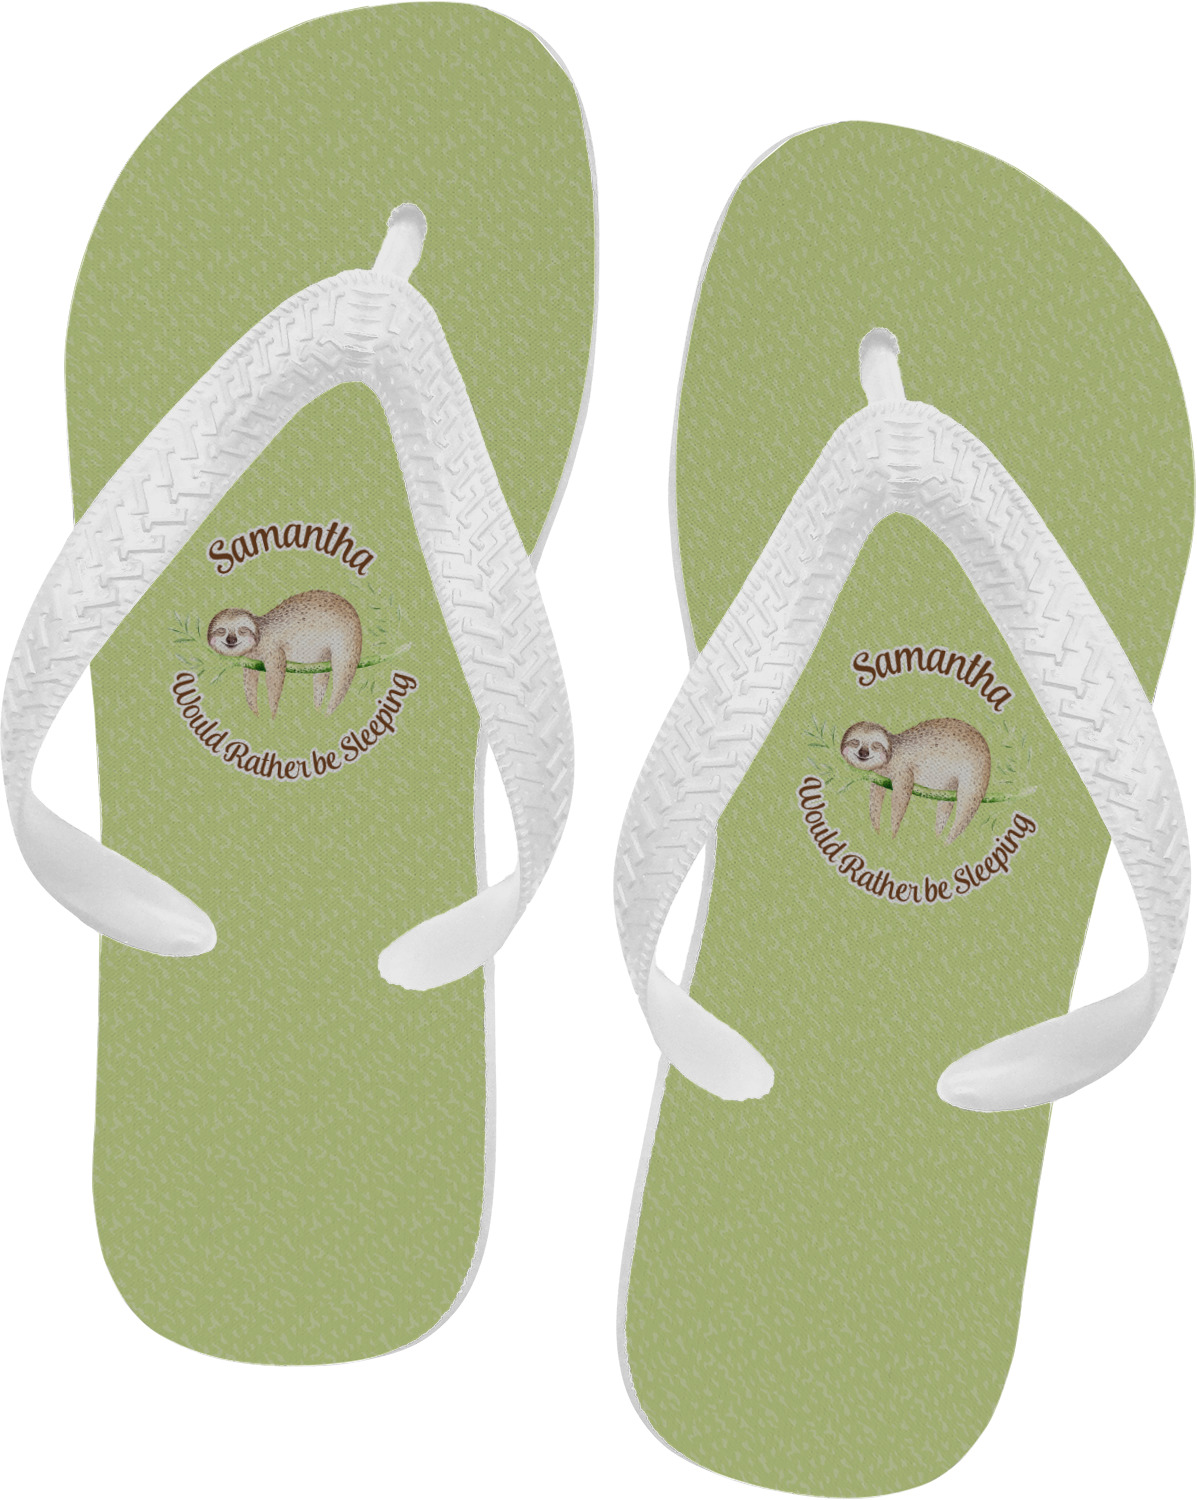 Sloth Flip Flops (Personalized 